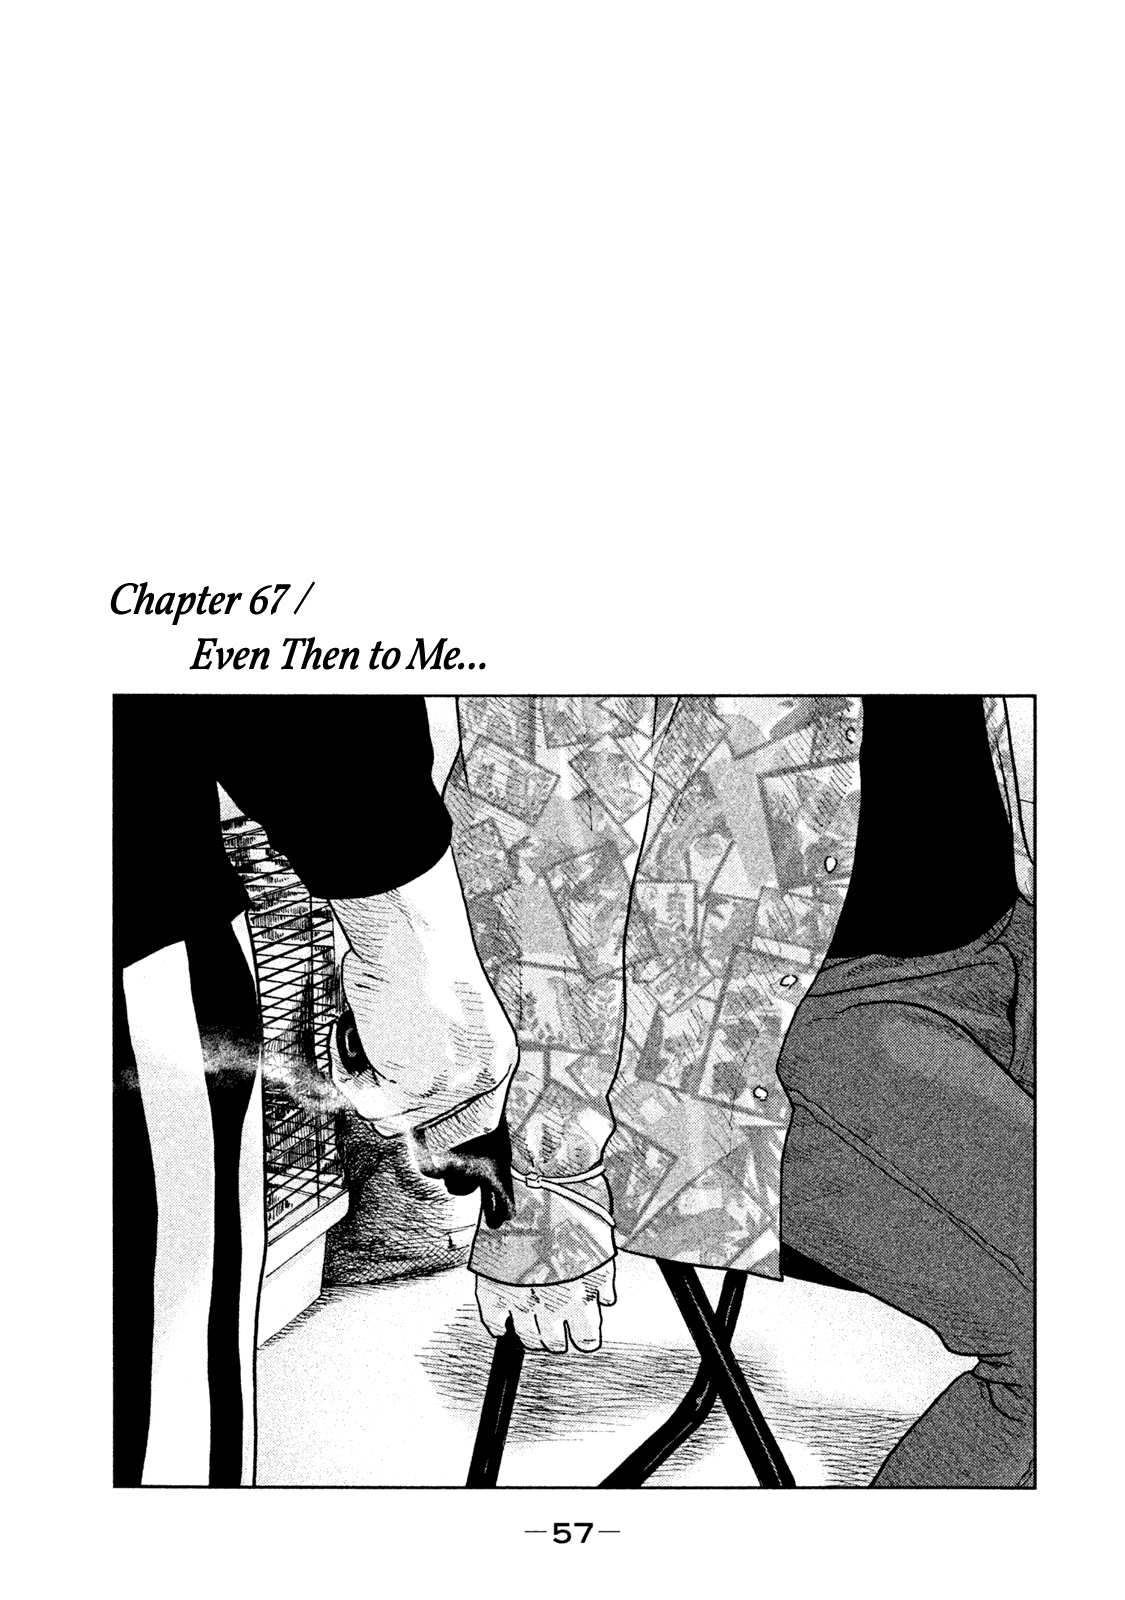 The Fable Vol. 7 Ch. 67 Even Then to Me...